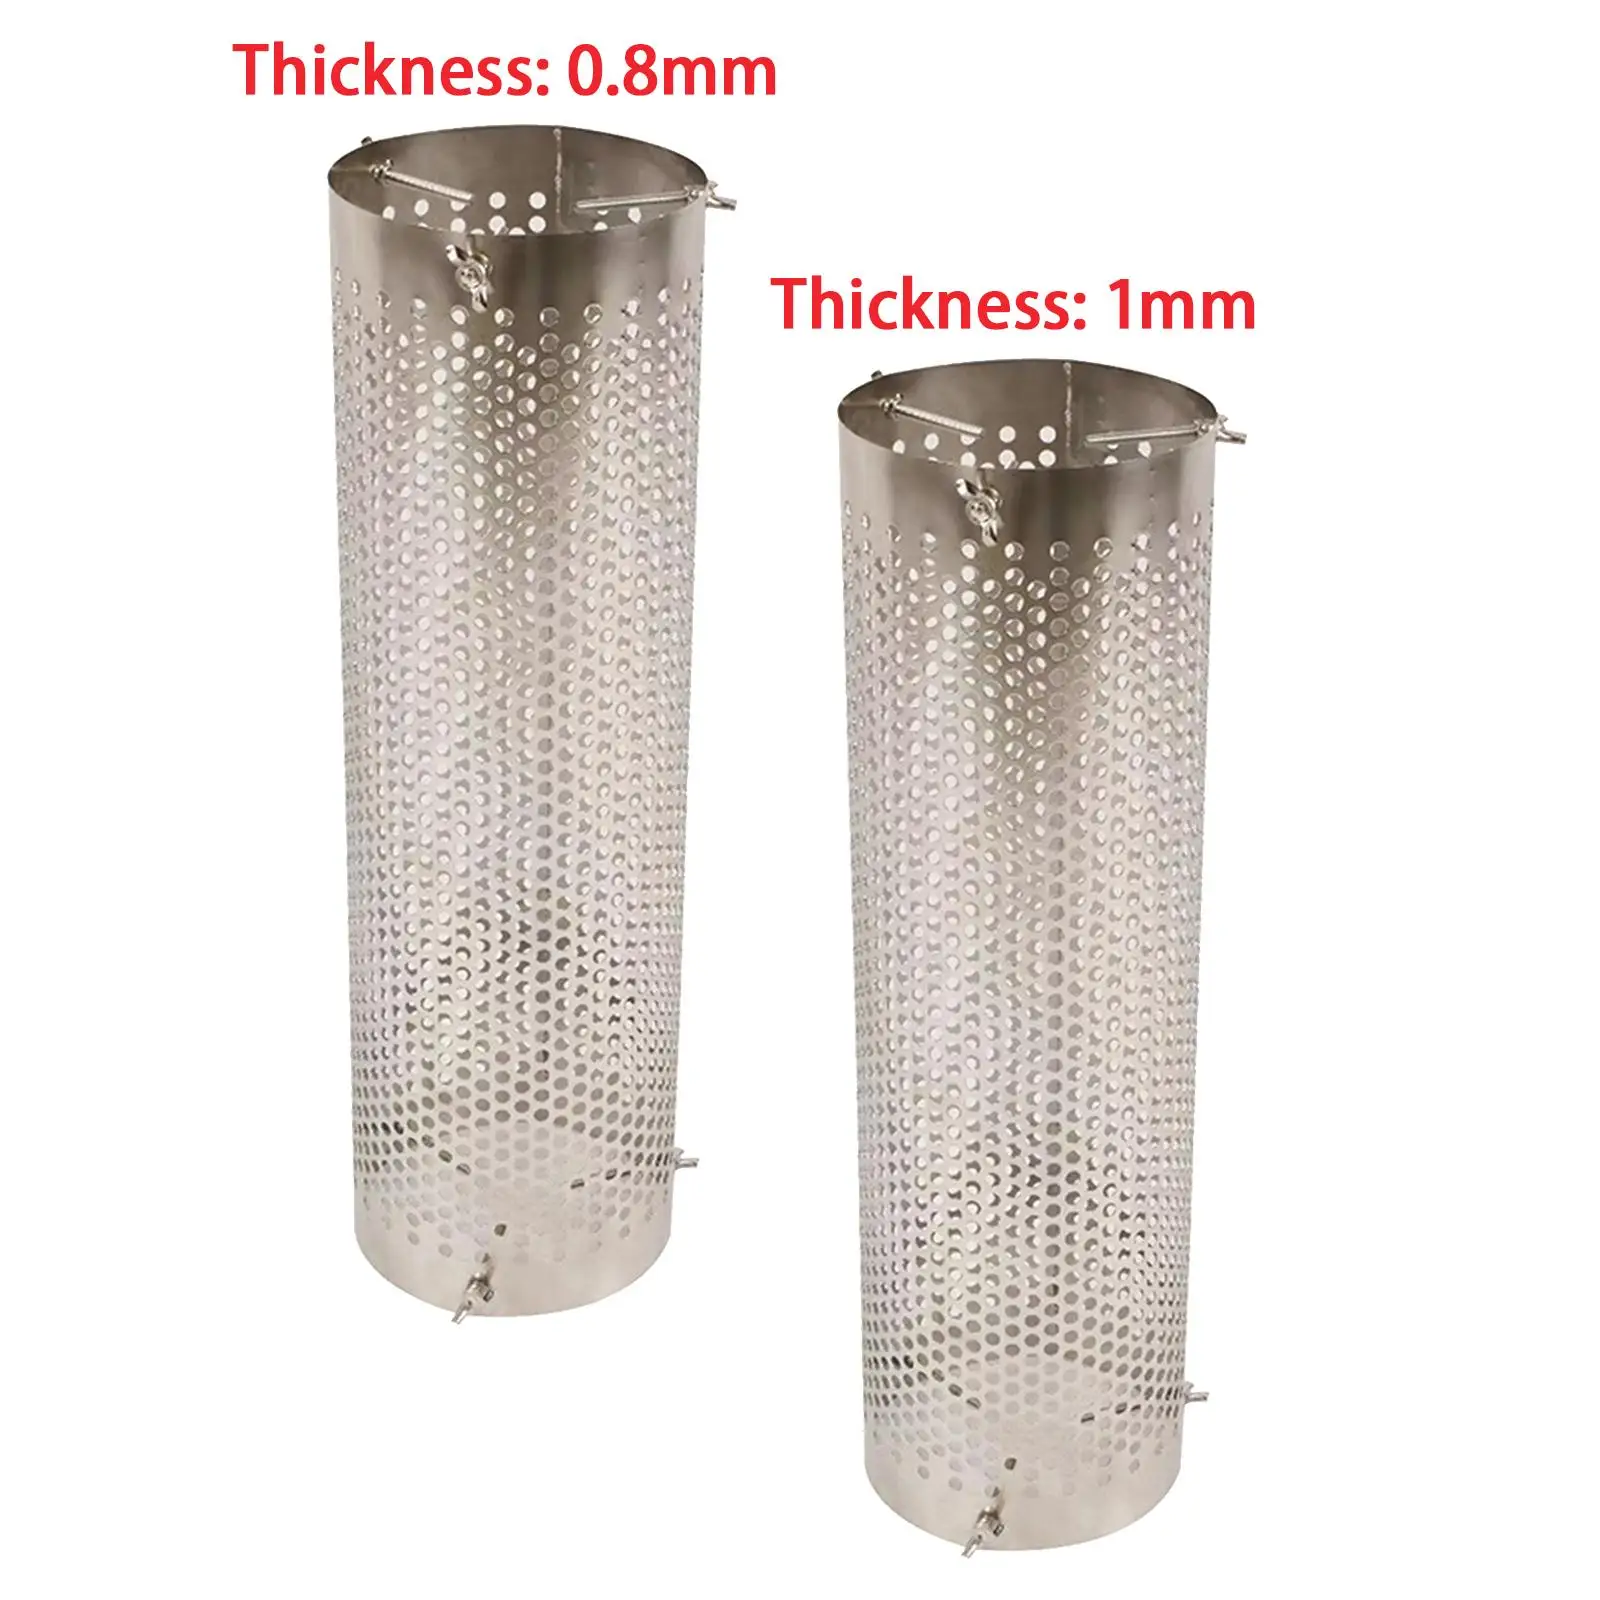 Tent Stove Chimney Pipe Mesh Exhaust Pipe Tent Protector Camping Stove Accessories Faster Heat Dissipation Chimney Mesh Guards